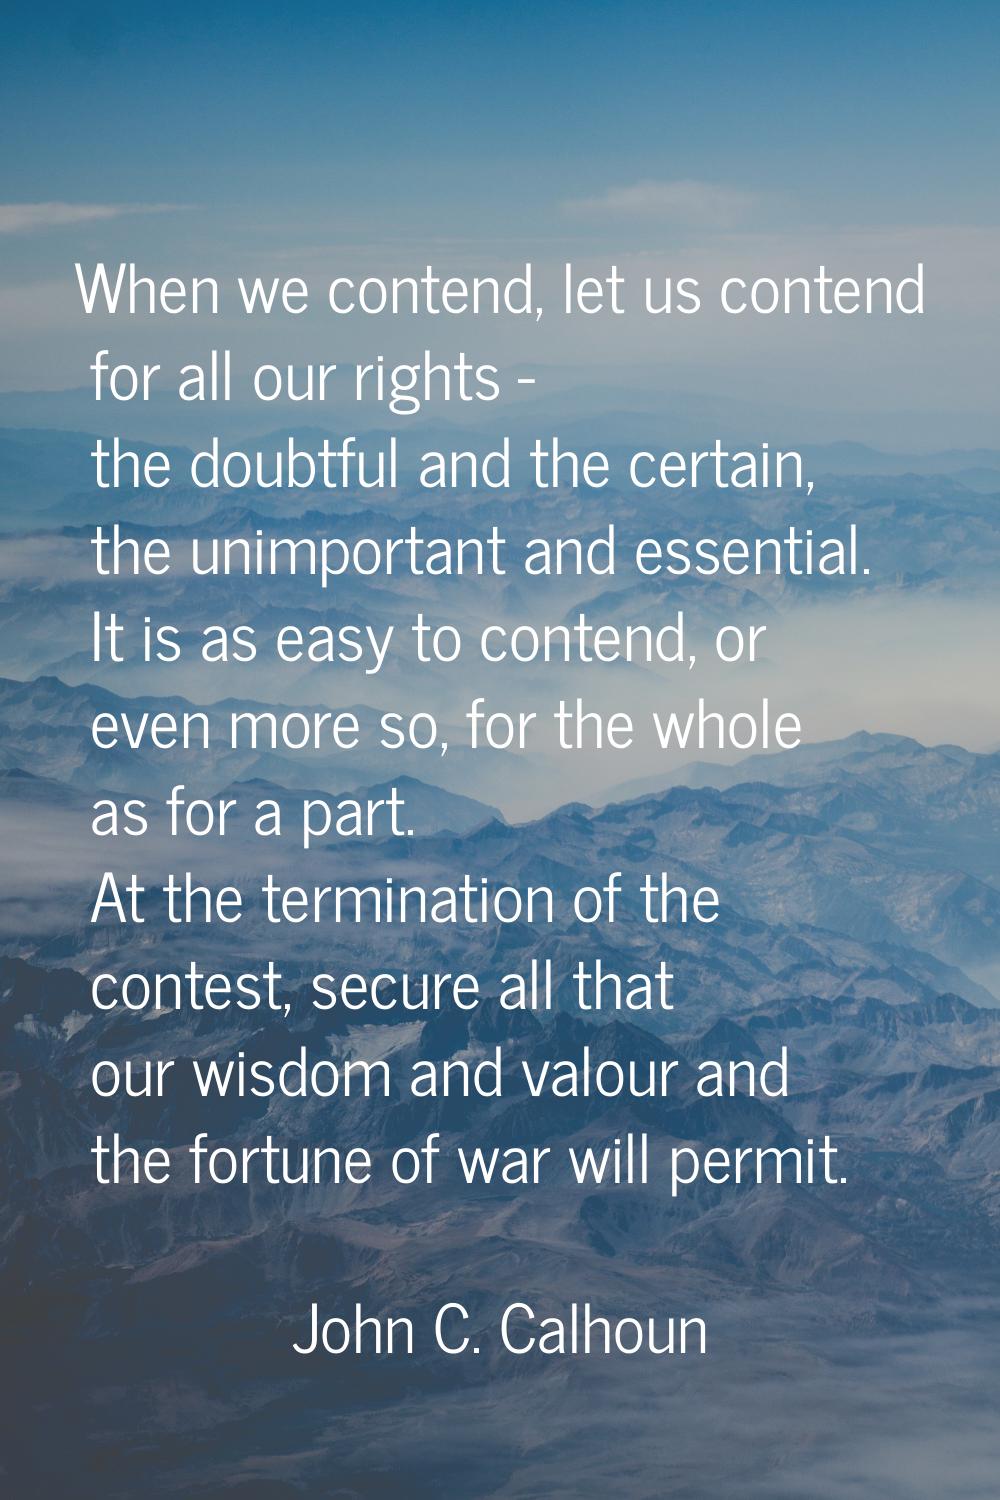 When we contend, let us contend for all our rights - the doubtful and the certain, the unimportant 